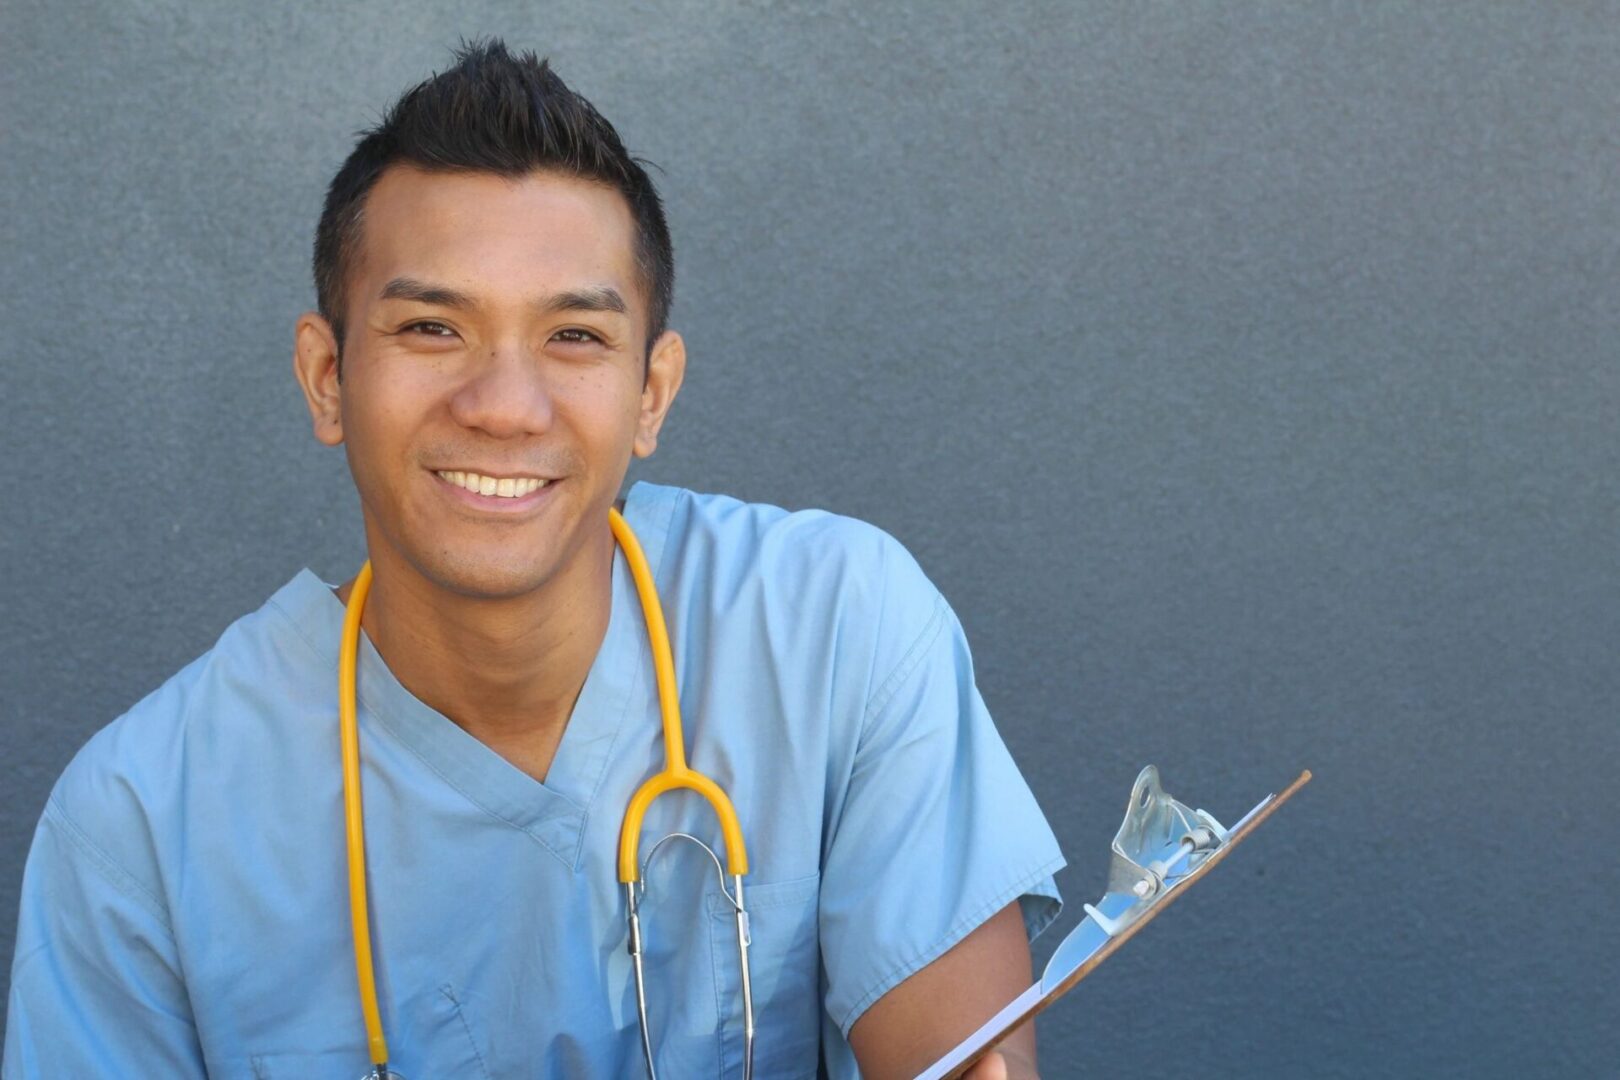 A health professional with a stethoscope, smiling